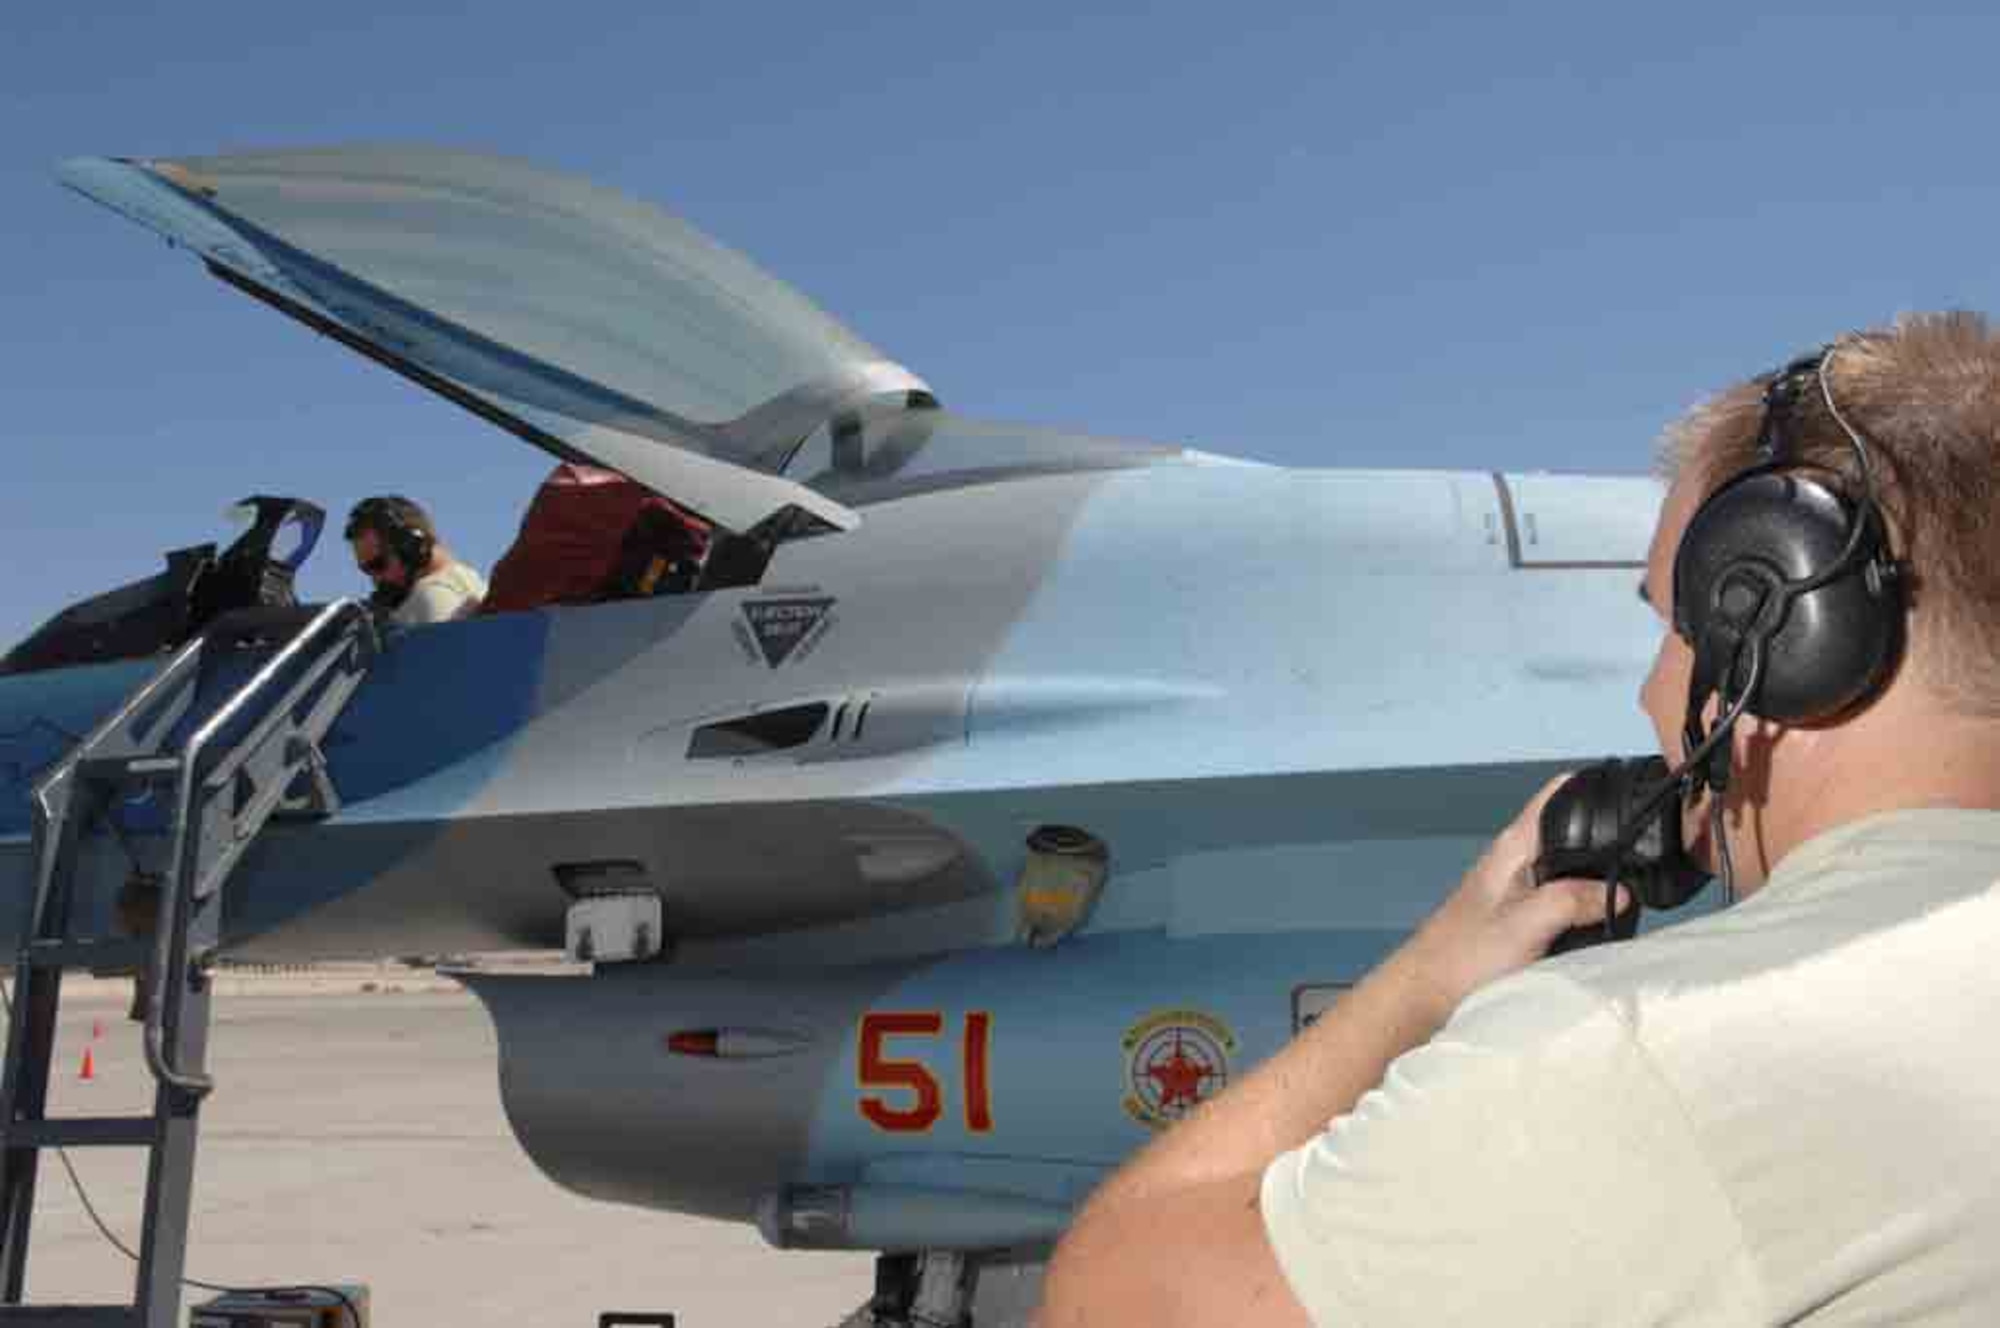 Staff Sgt. Giovanni Conti (right), and Senior Airman Shawn Ohagan, both F-16 avionics specialists assigned to the 926th Group Detachment 2, conduct a radar functional check on an F-16 July 24, 2008 at Nellis Air Force Base, Nev. The 926th Group is an Air Force Reserve unit under 10th Air Force, Naval Air Station Joint Reserve Base, Fort Worth, Texas. The group is located at Nellis AFB as an associate unit to the United States Air Force Warfare Center. Through Total Force Integration, reservists are integrated into regular Air Force units, accomplishing the USAFWC's mission alongside REGAF personnel on a daily basis.
(U.S. Air Force Photo/Senior Airman Larry E. Reid Jr., Released)